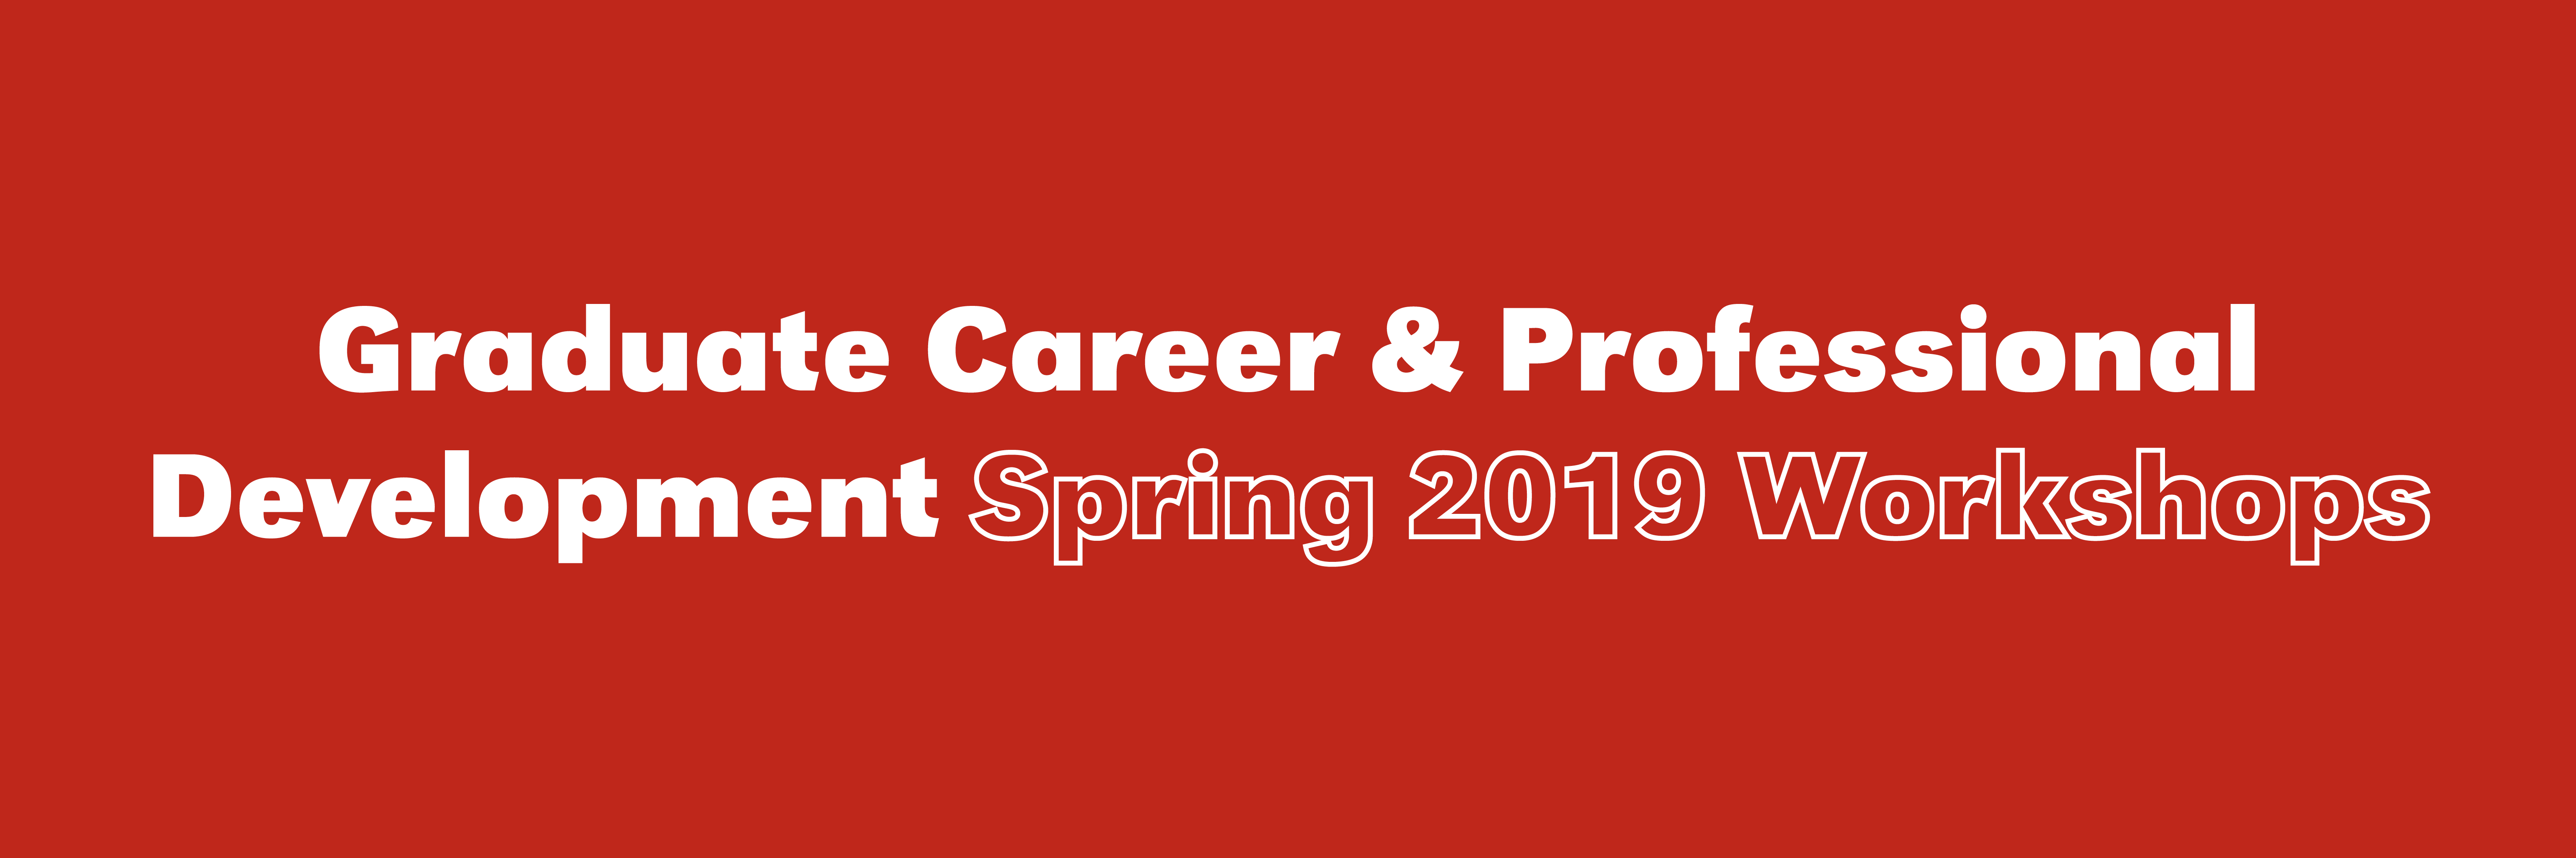 Save the dates or register early for the upcoming career and professional development workshops in 2019.